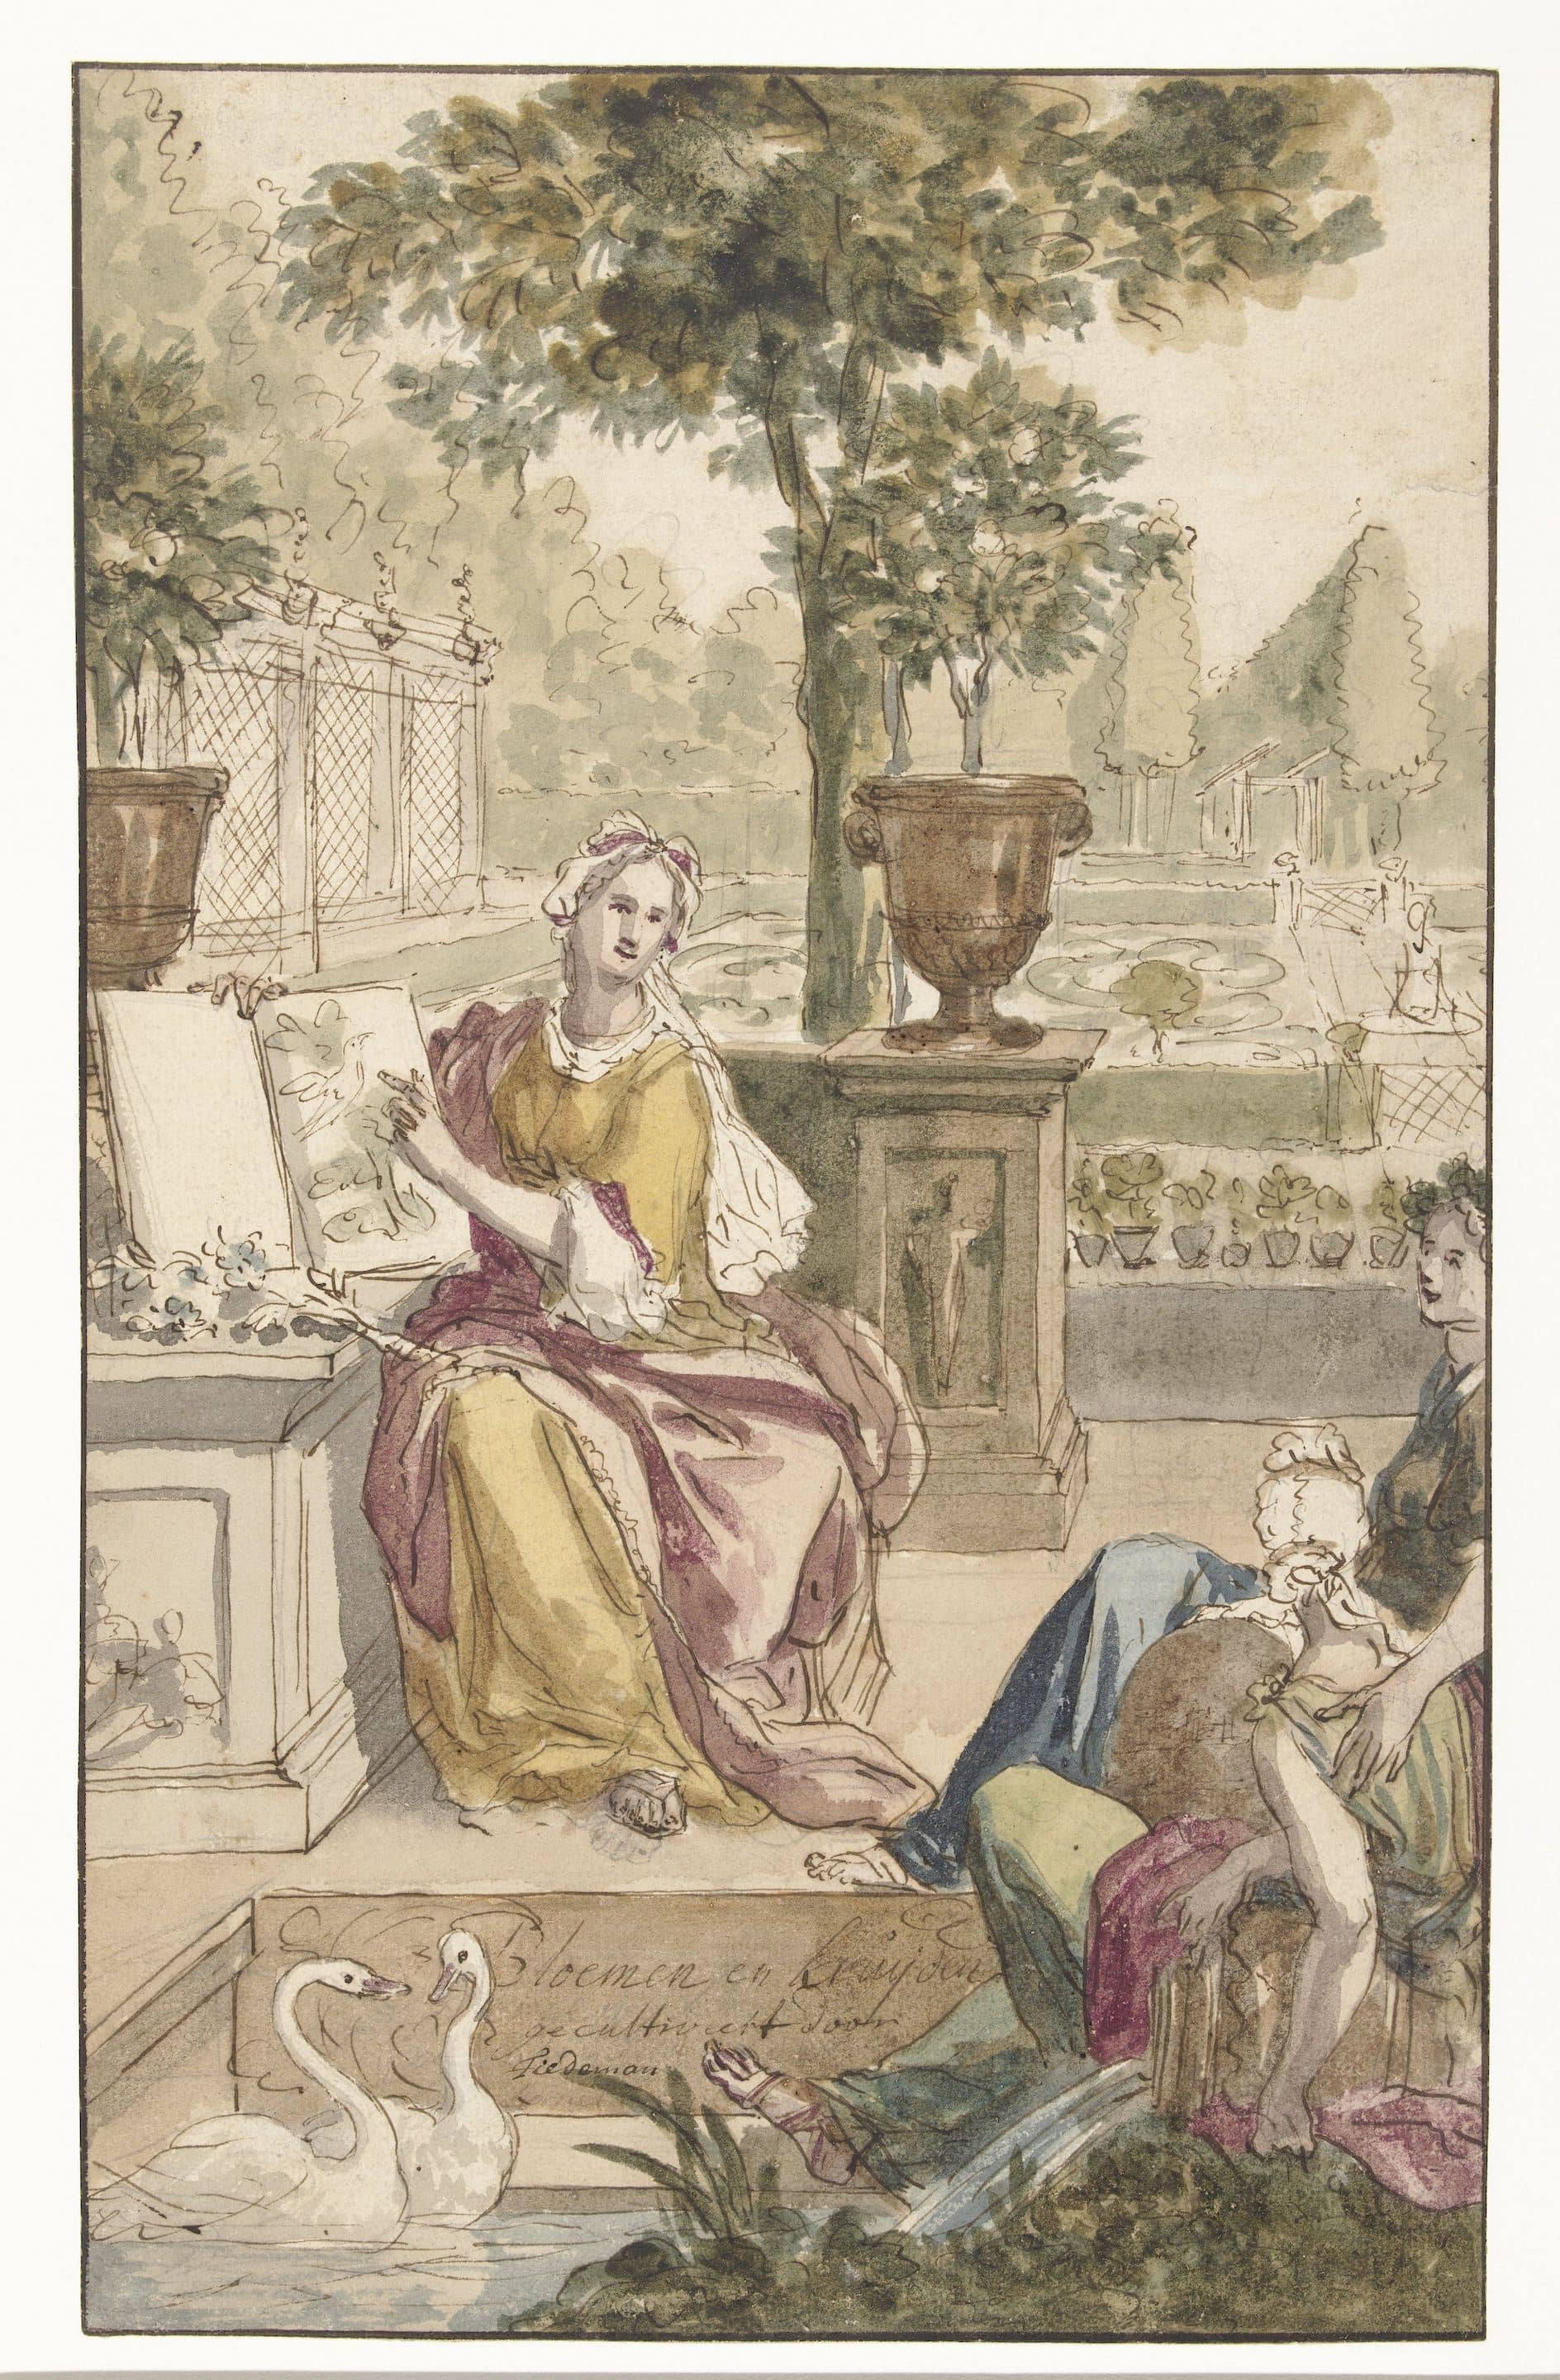 A colored sketch of a woman sitting in a garden, pointing to an open book.